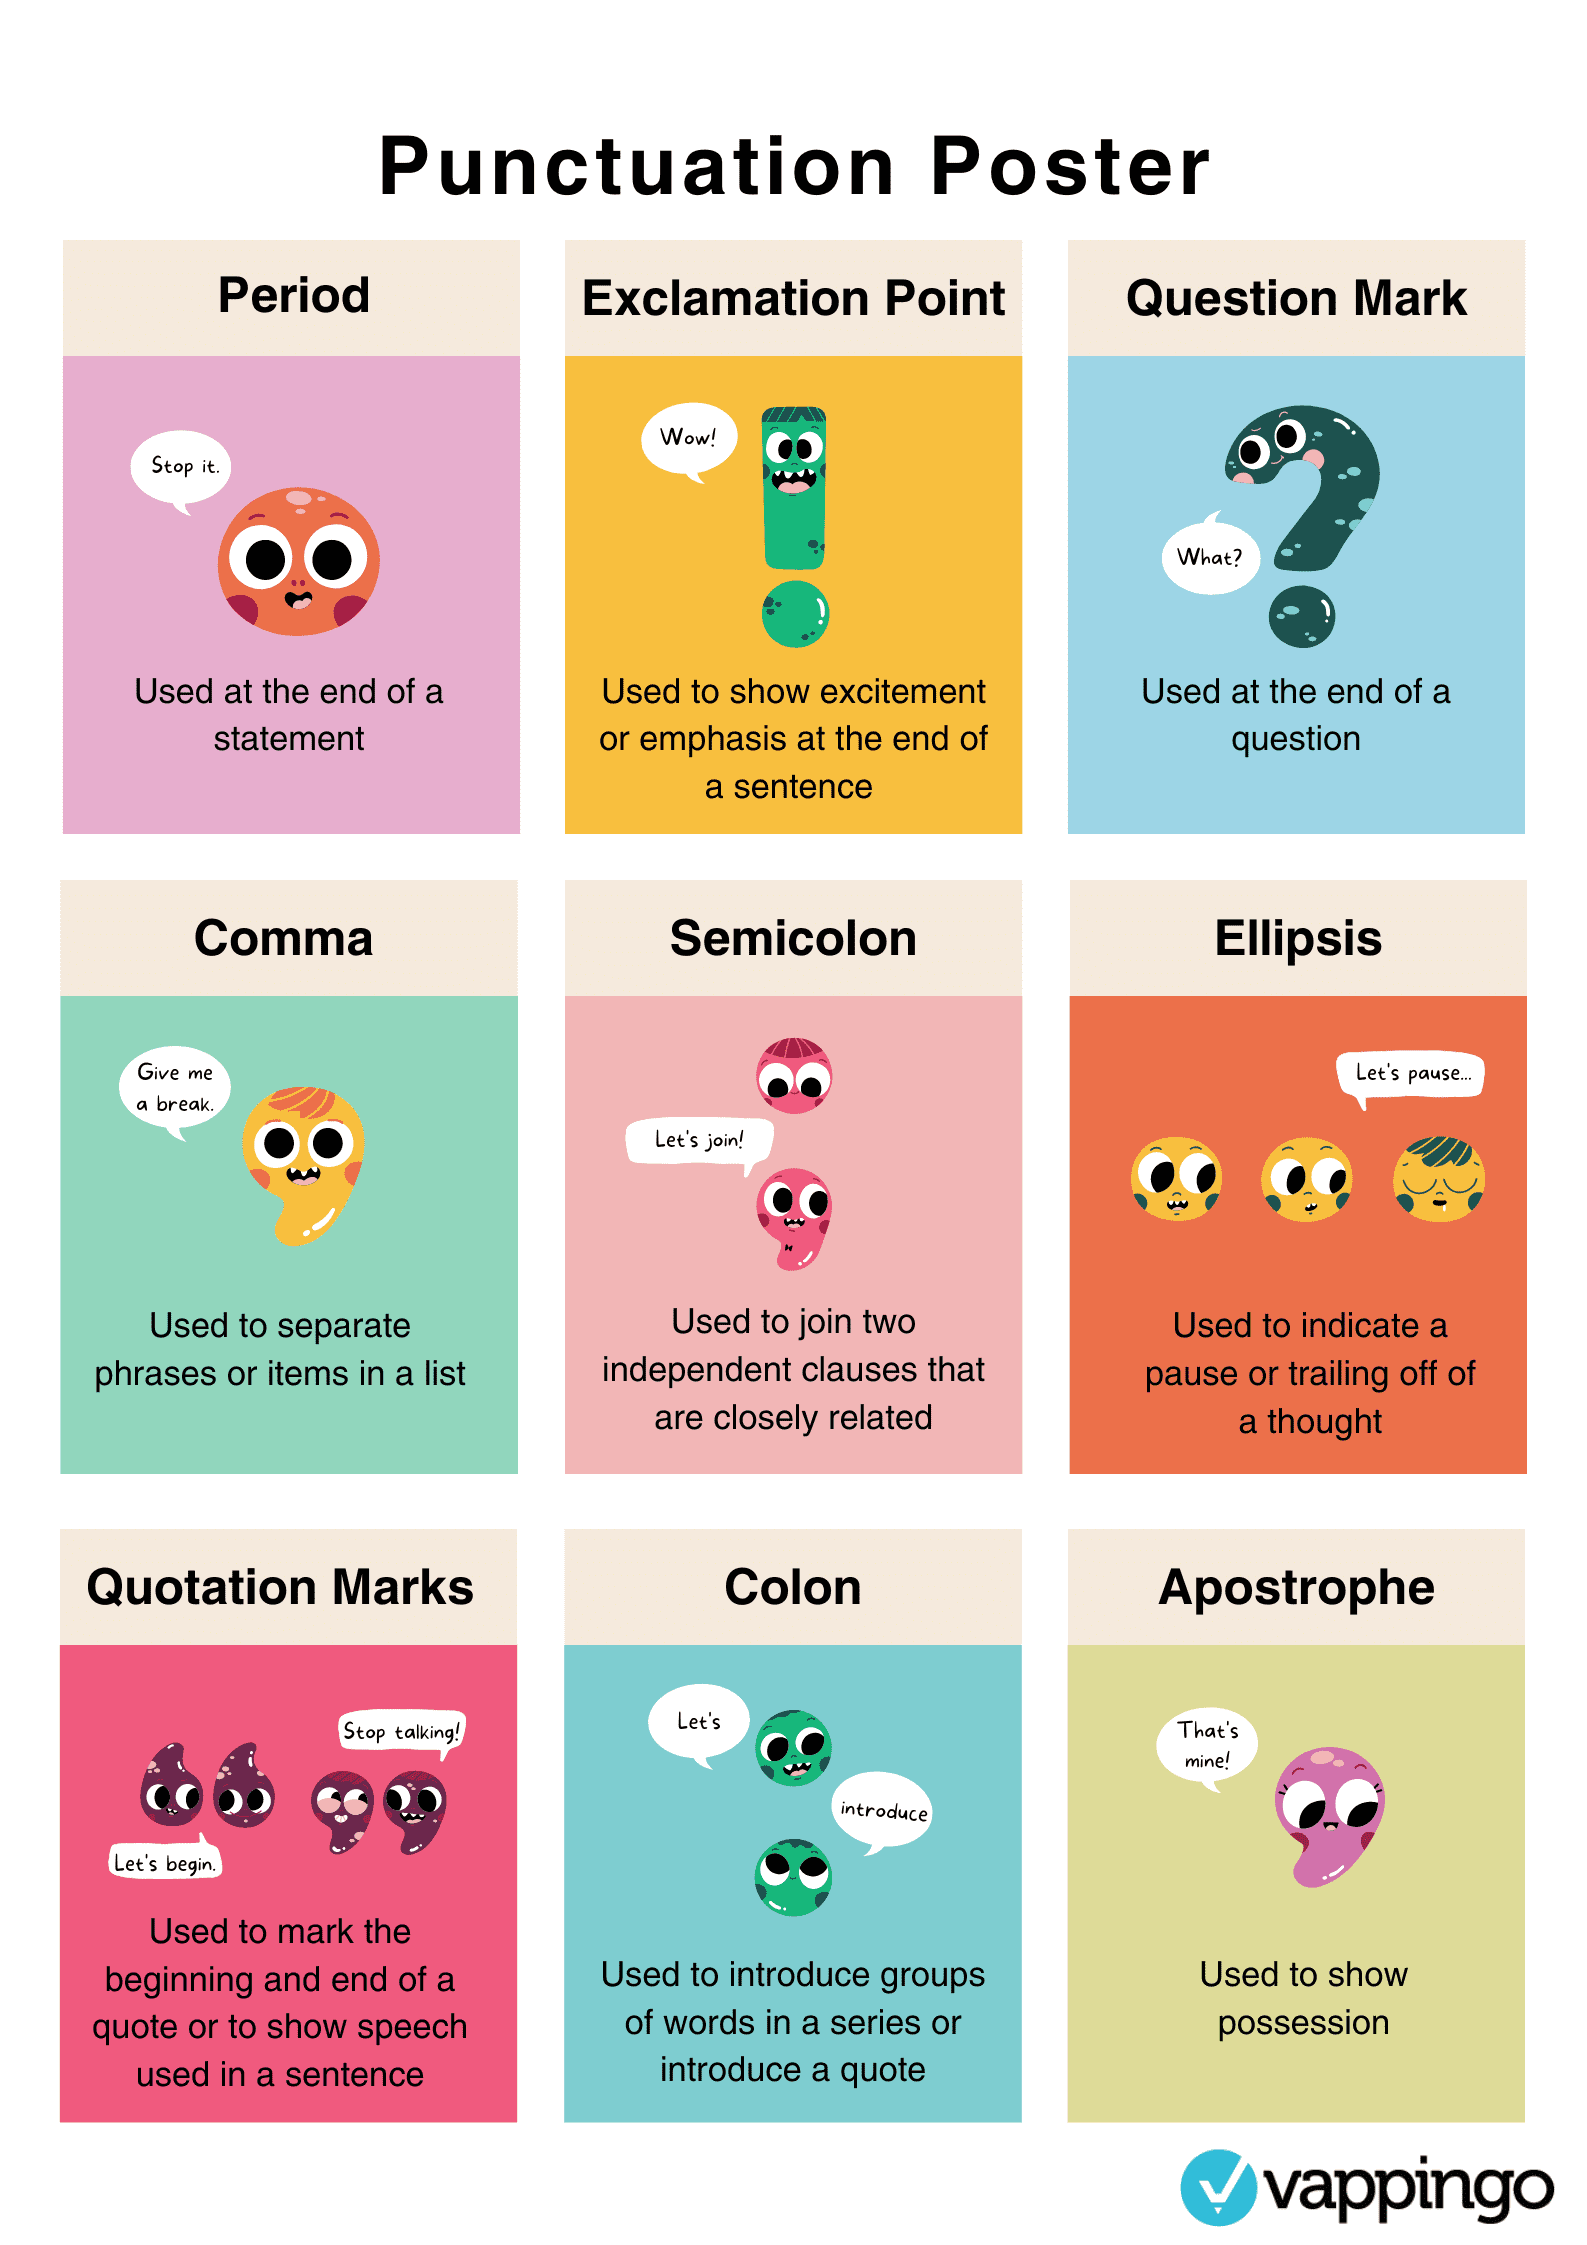 colon punctuation examples